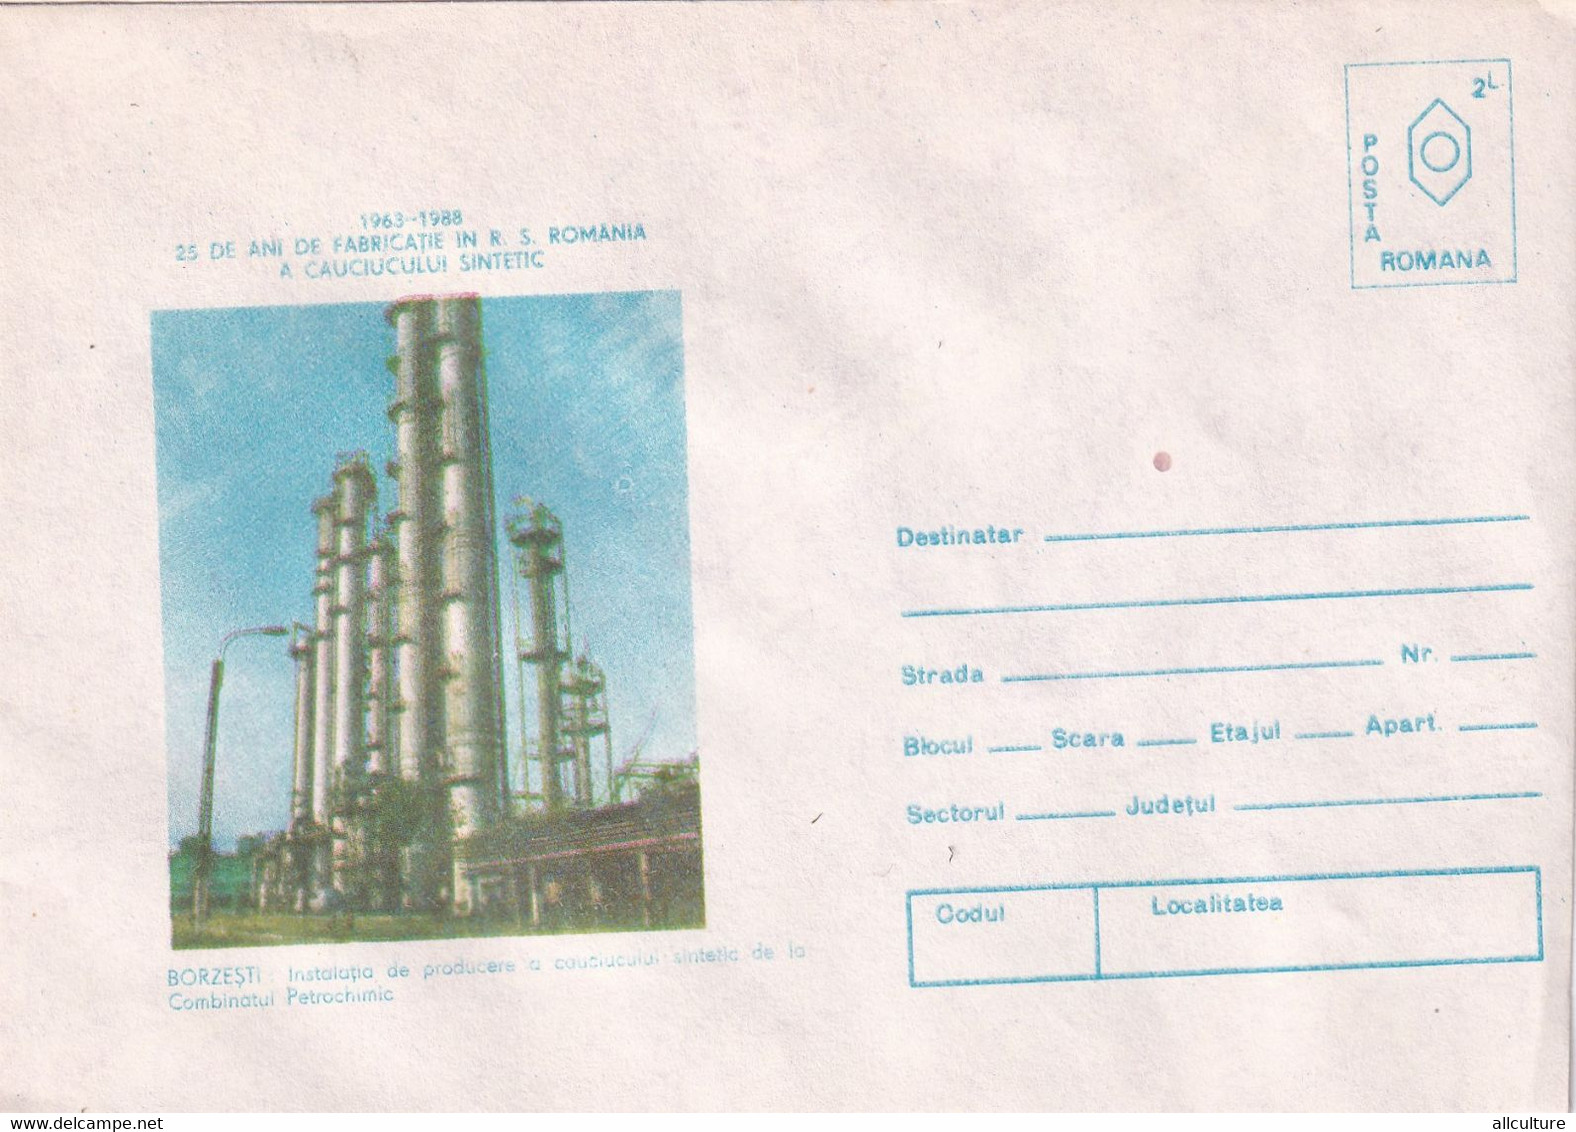 A3119 - 25 Years Of Manufacturing Synthetic Rubber, Petrochemical Plant 1963-1988, Borzesti  Romania Cover Stationery - Chemie